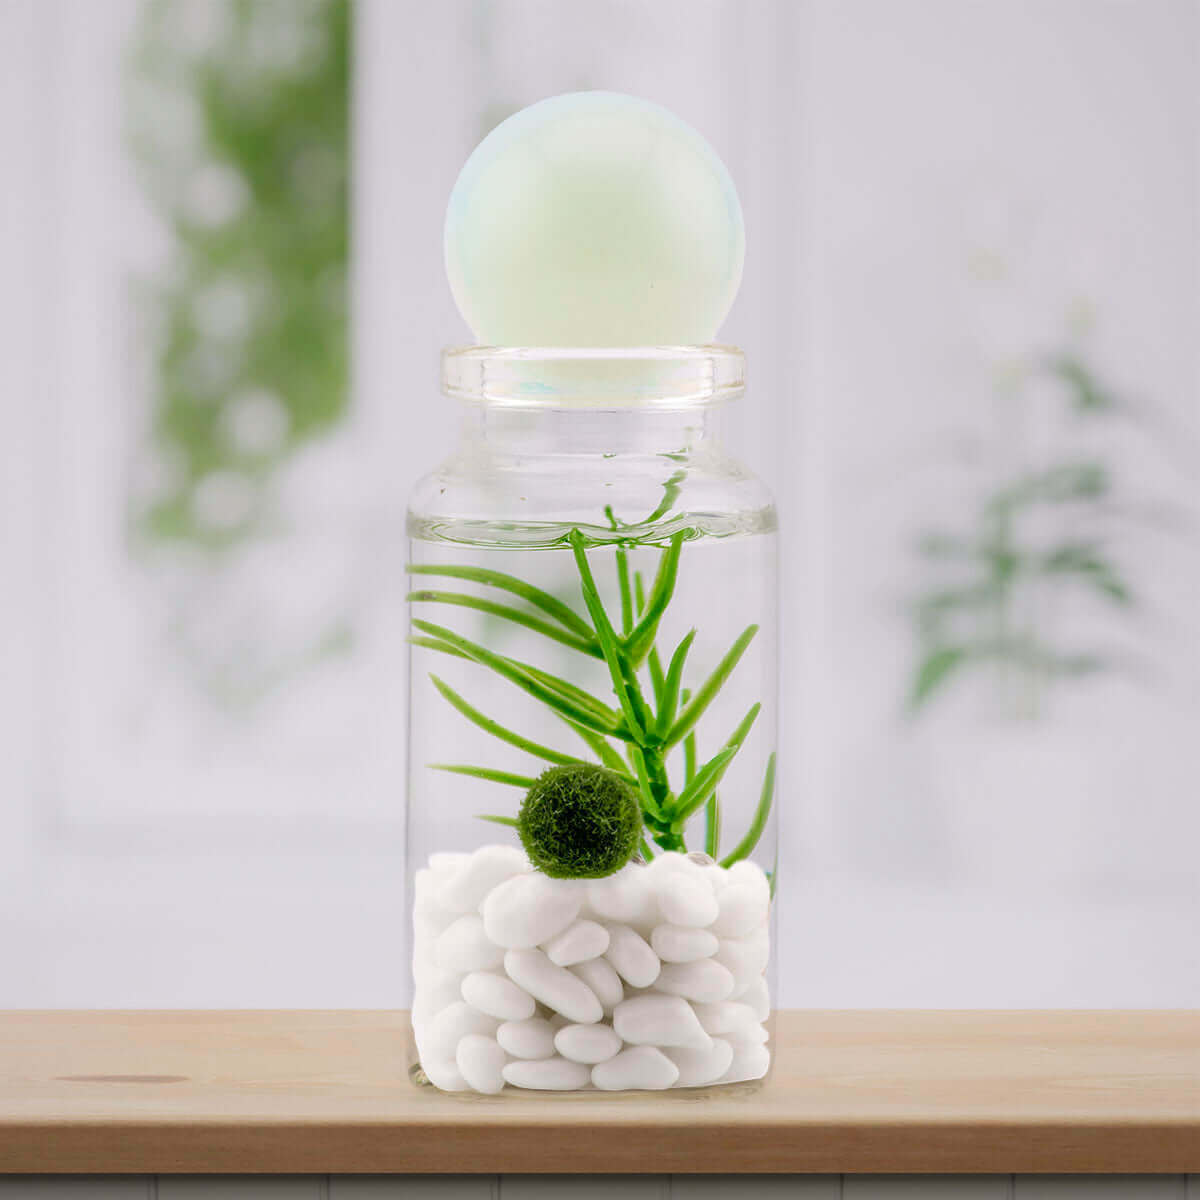 Opalite sphere on moss ball terrarium, shimmering with an opalescent glow.